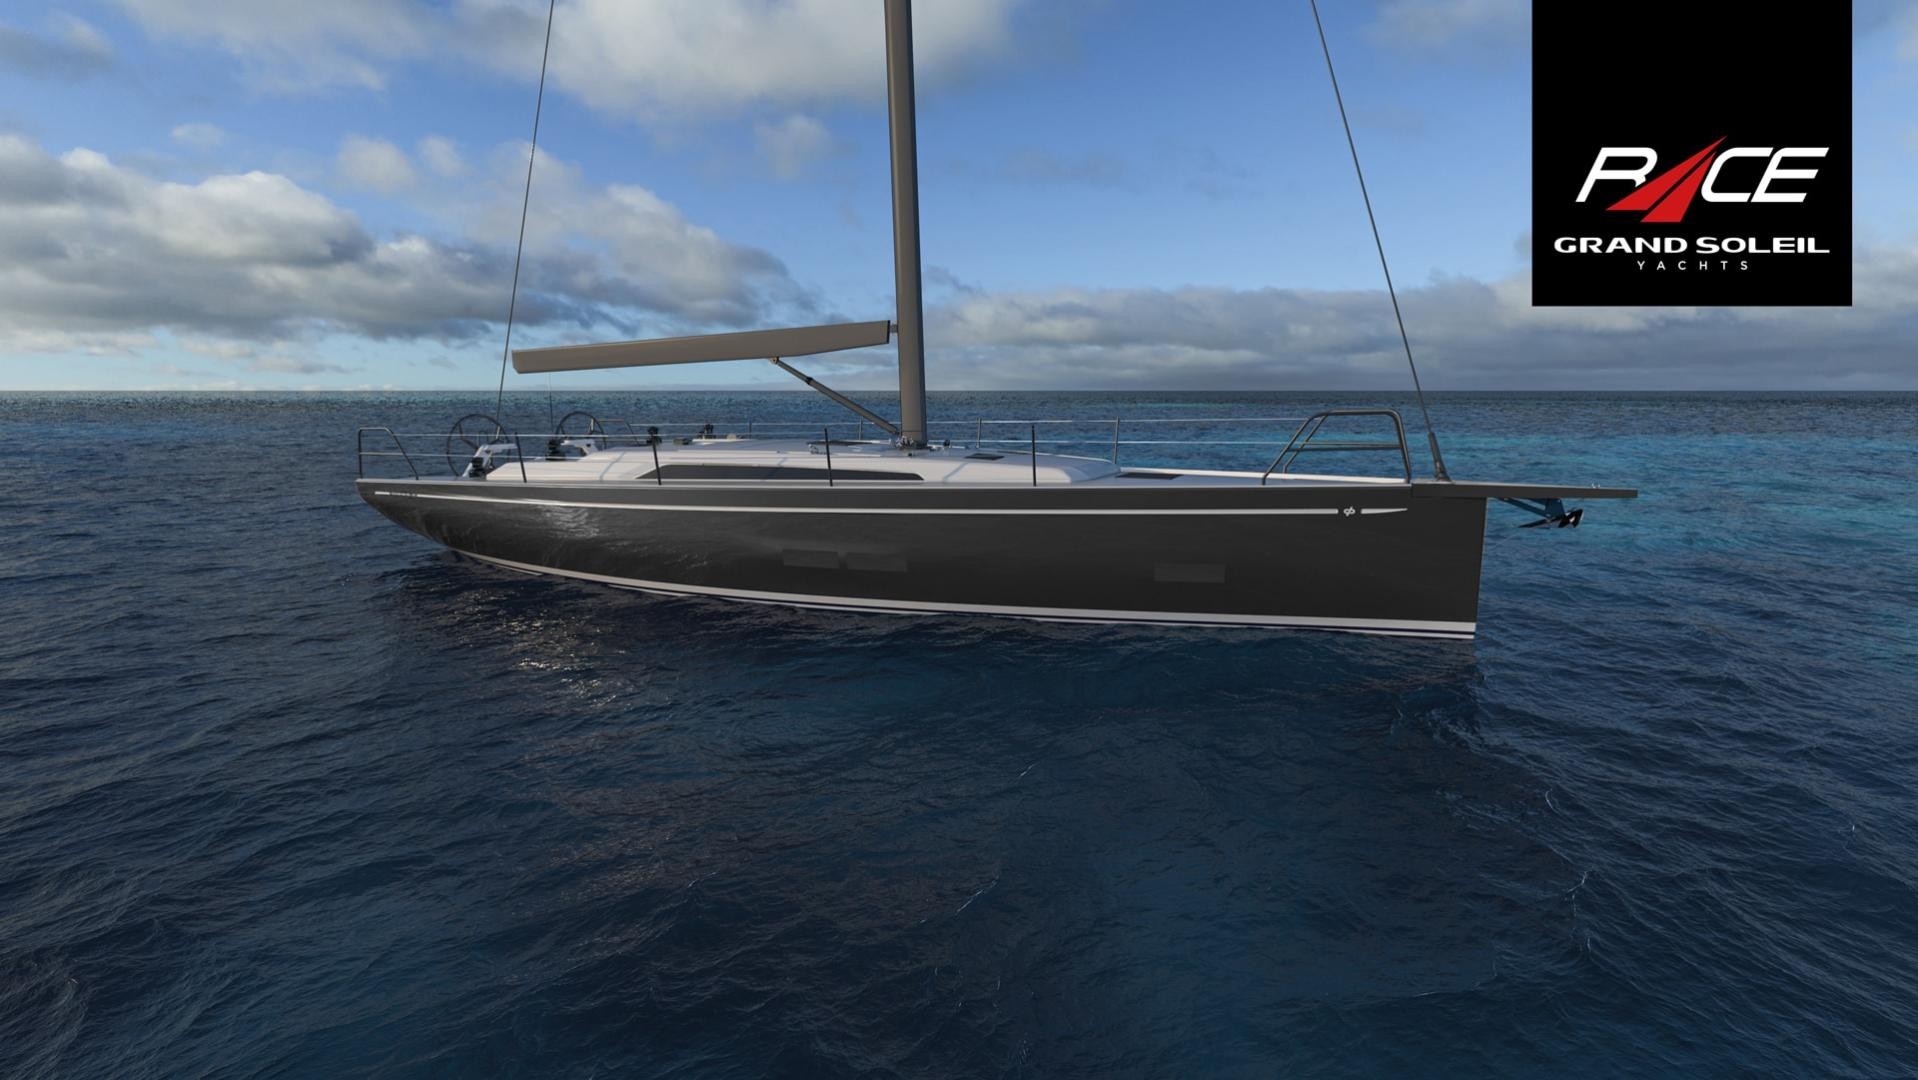 New Grand Soleil 44 at the 2020 Yachting Festival of Cannes